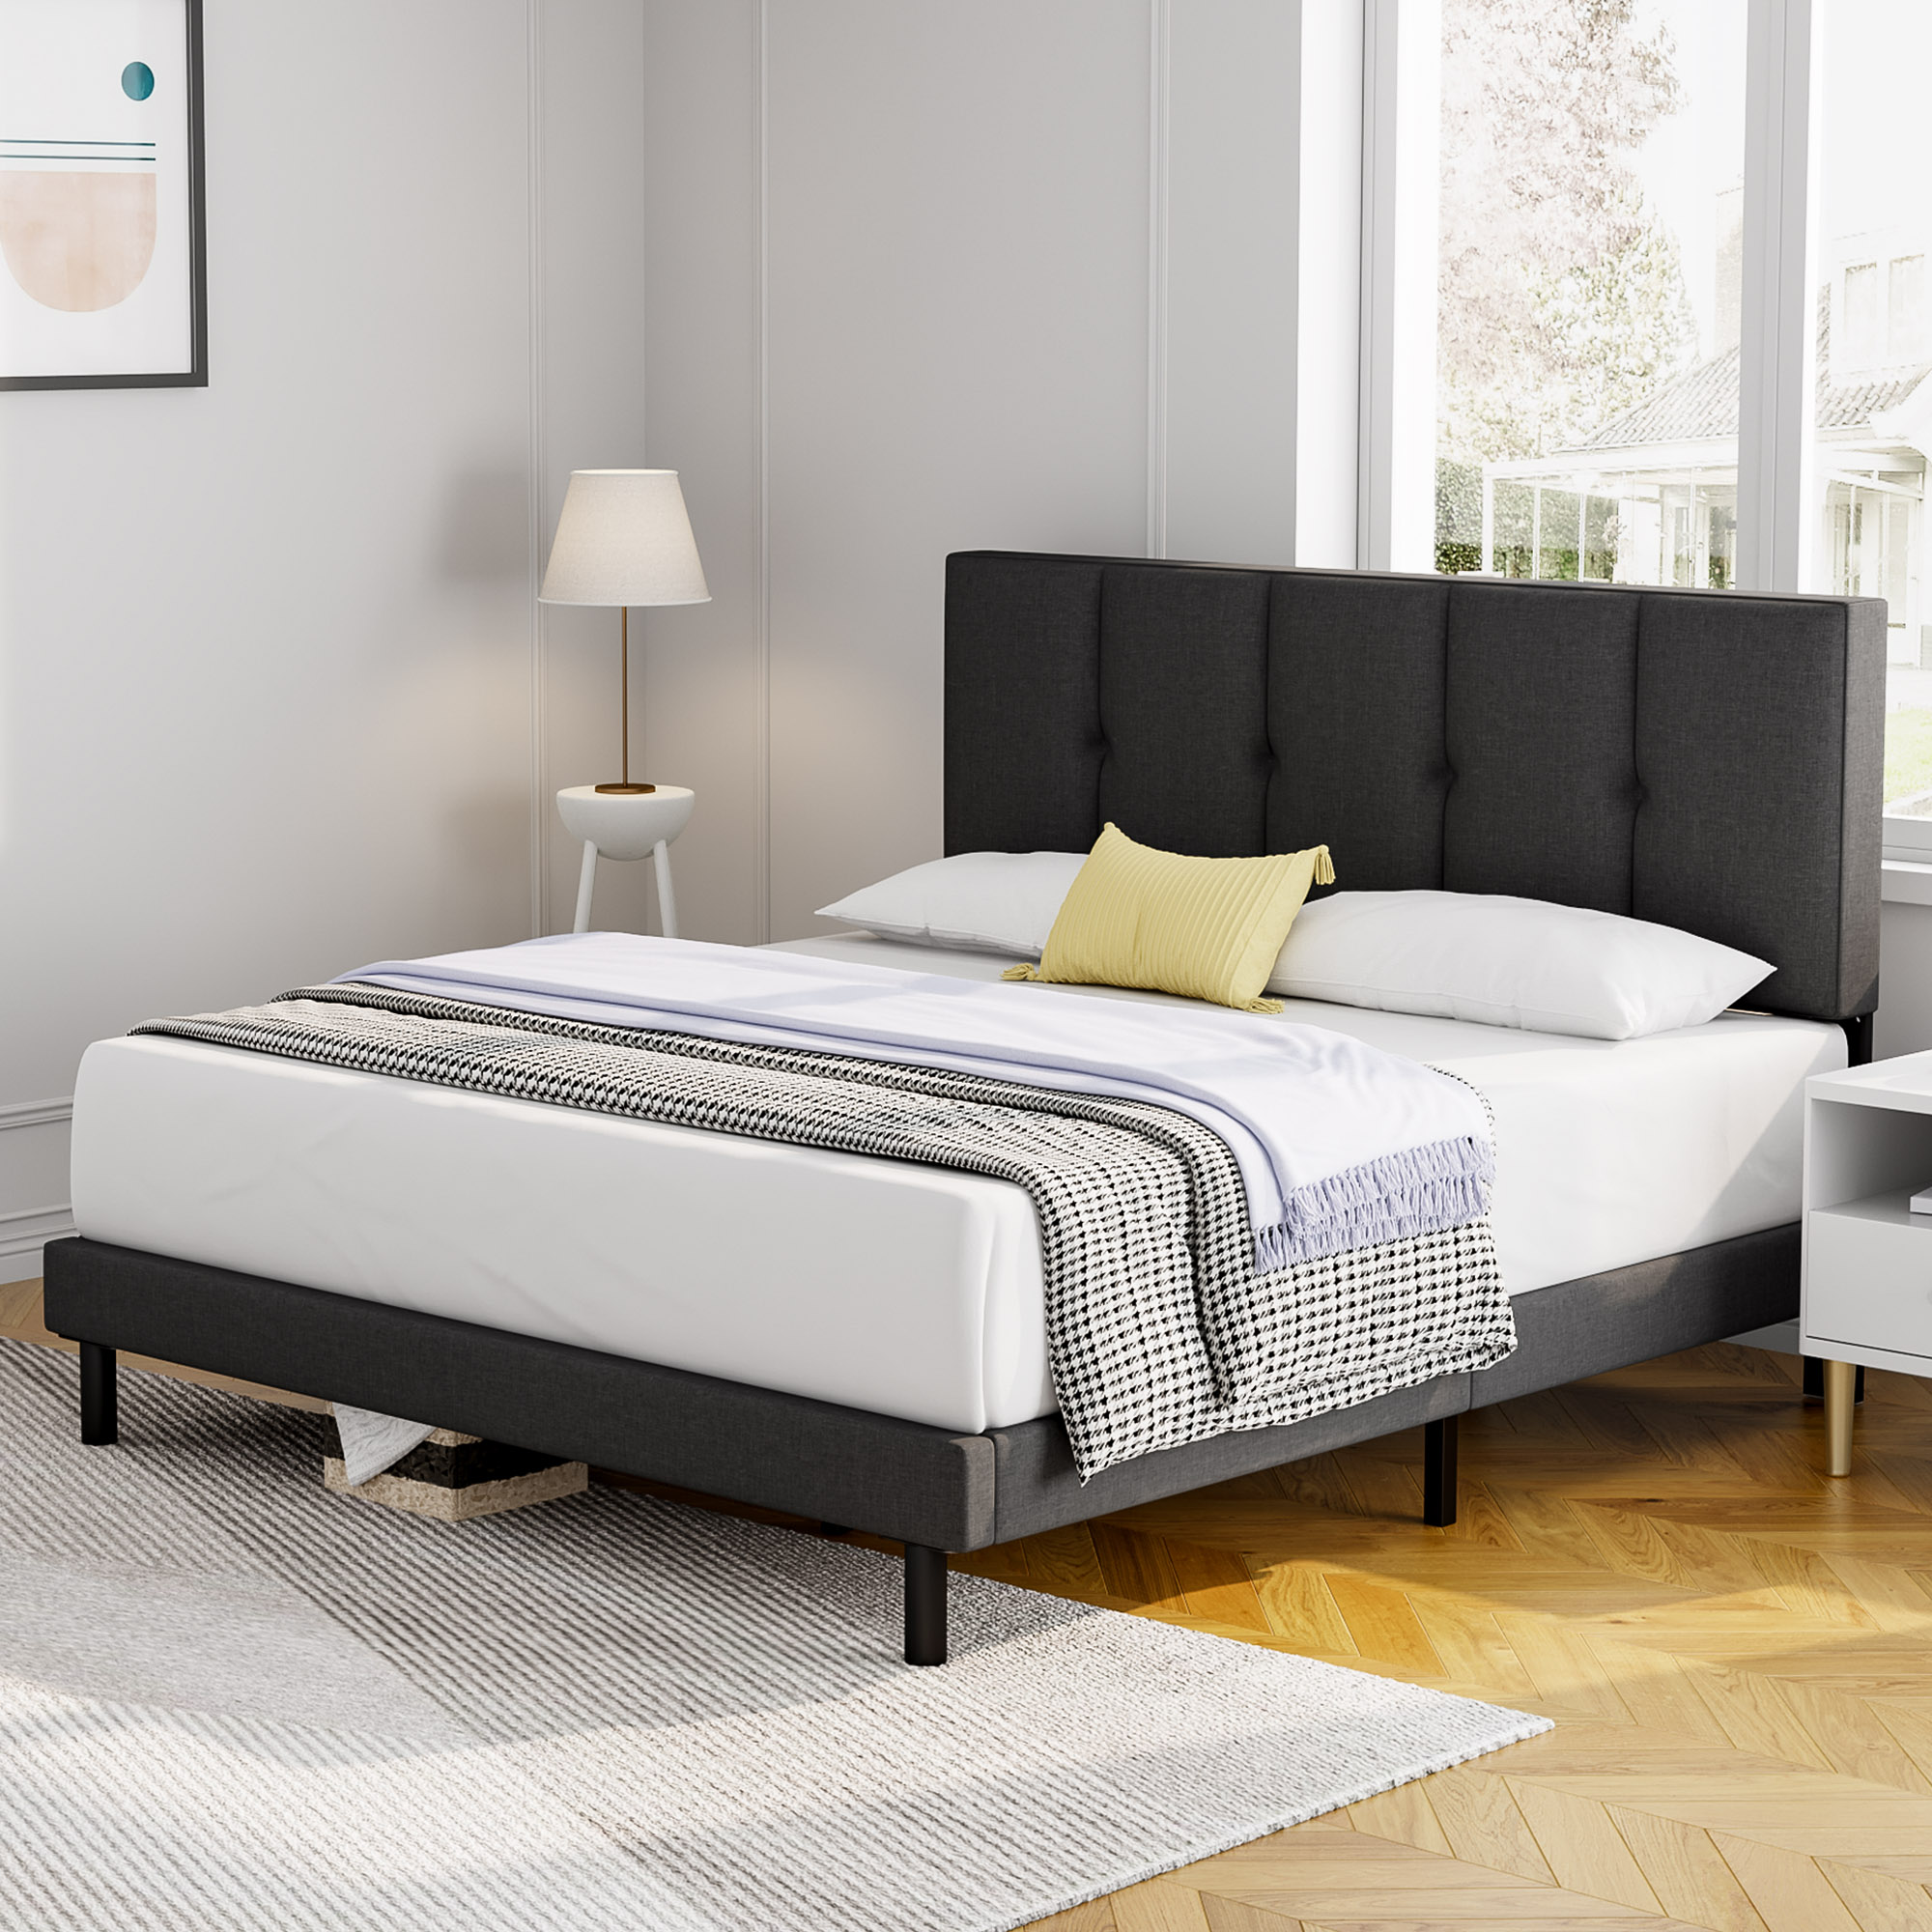 Queen bed, HAIIDE Queen Size Platform Bed Frame with Fabric Upholstered Headboard, No Box Spring Needed, Dark Grey - image 3 of 7